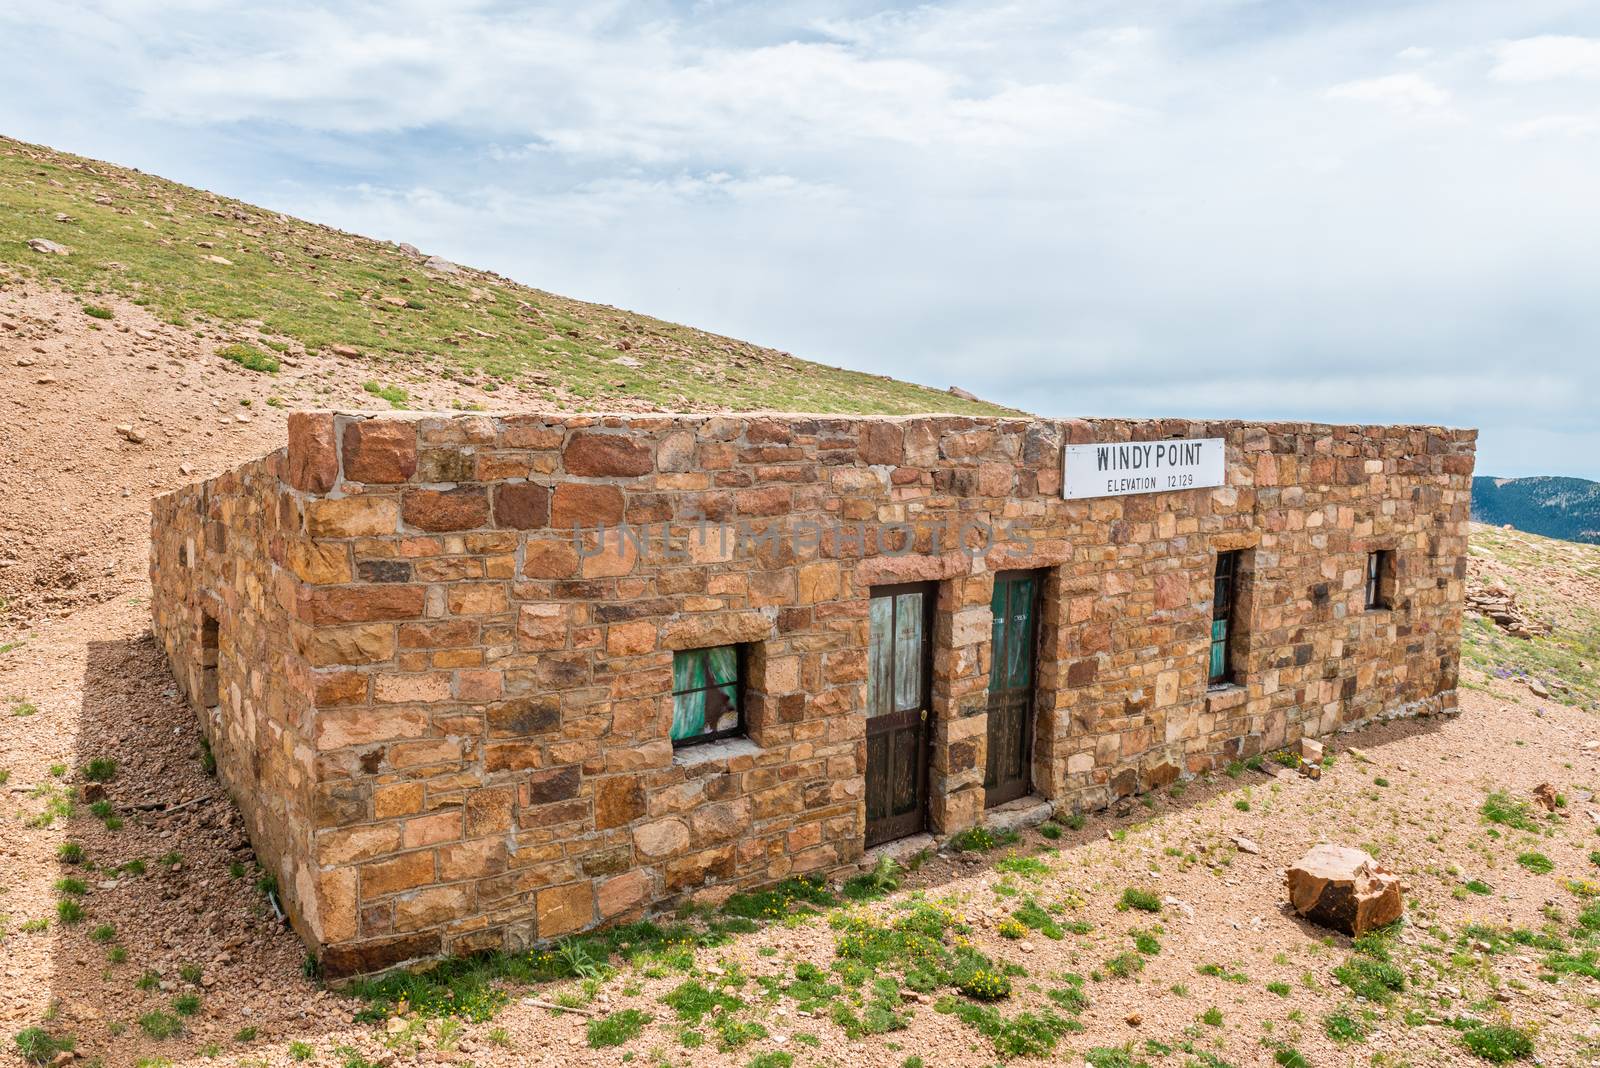 Windy Point building on Pikes Peak in Pike National Forest, Colorado by Njean